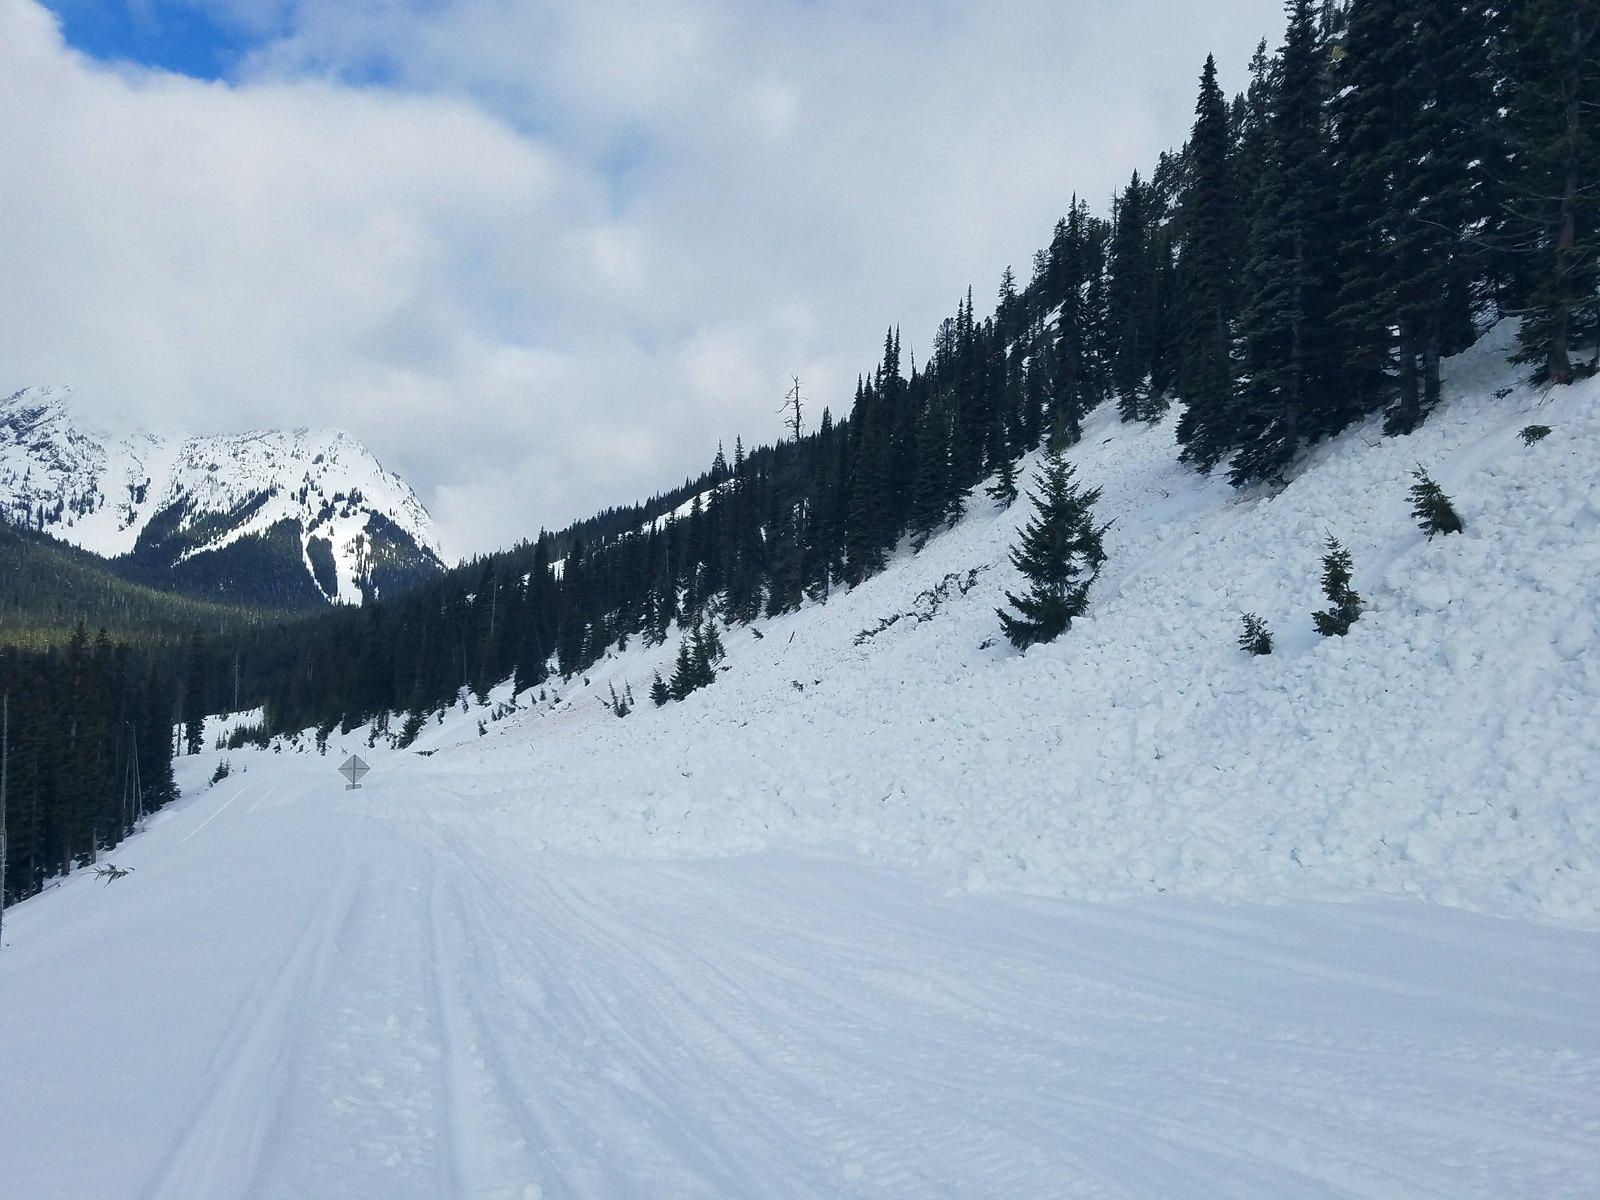 North Cascades Highway Closes For Season; Avalanche Chutes Filling